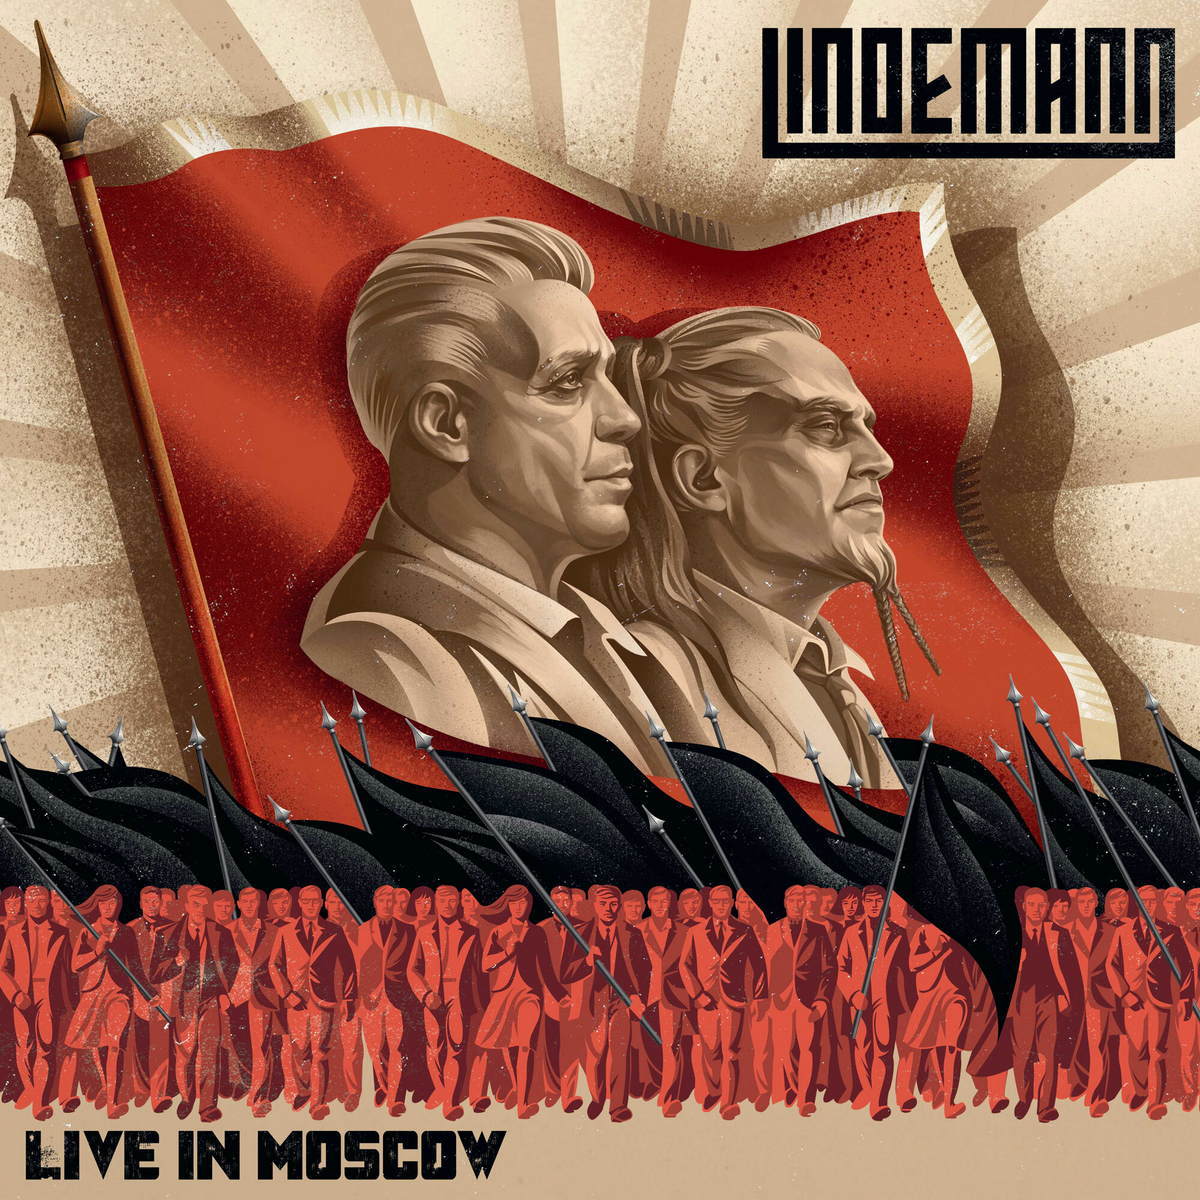 Рок Universal (Ger) Lindemann - Live in Moscow (2LP, Black Vinyl) рок universal ger lindemann live in moscow 2lp black vinyl